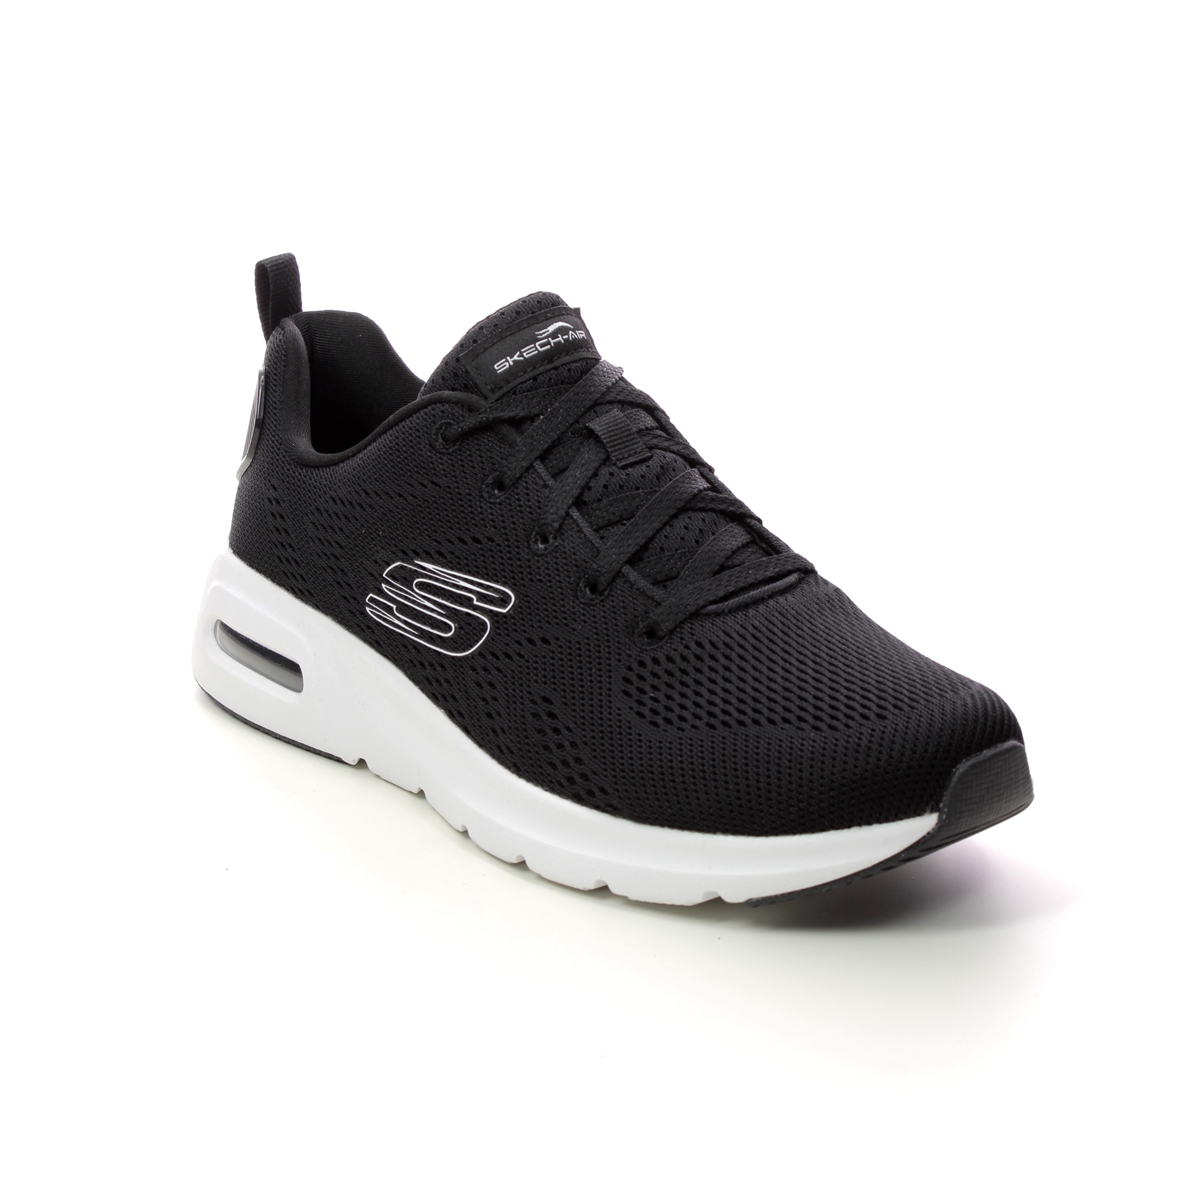 Skechers Skech Air Court Black White Womens Trainers 149948 In Size 6 In Plain Black White